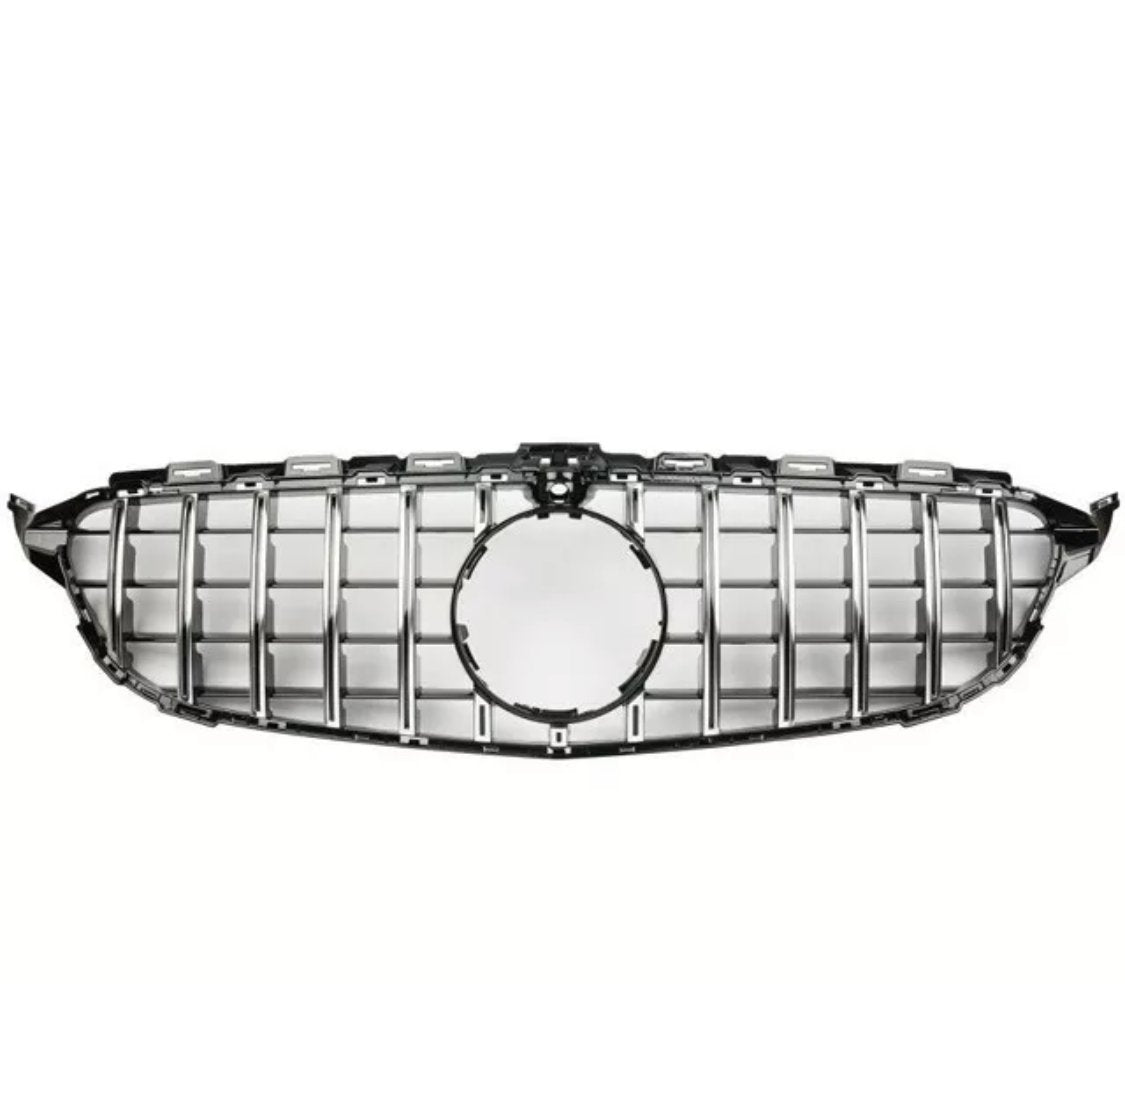 C Class - W205: Chrome GT Panamericana Style Grills 15-18 (No Camera) - Carbon Accents